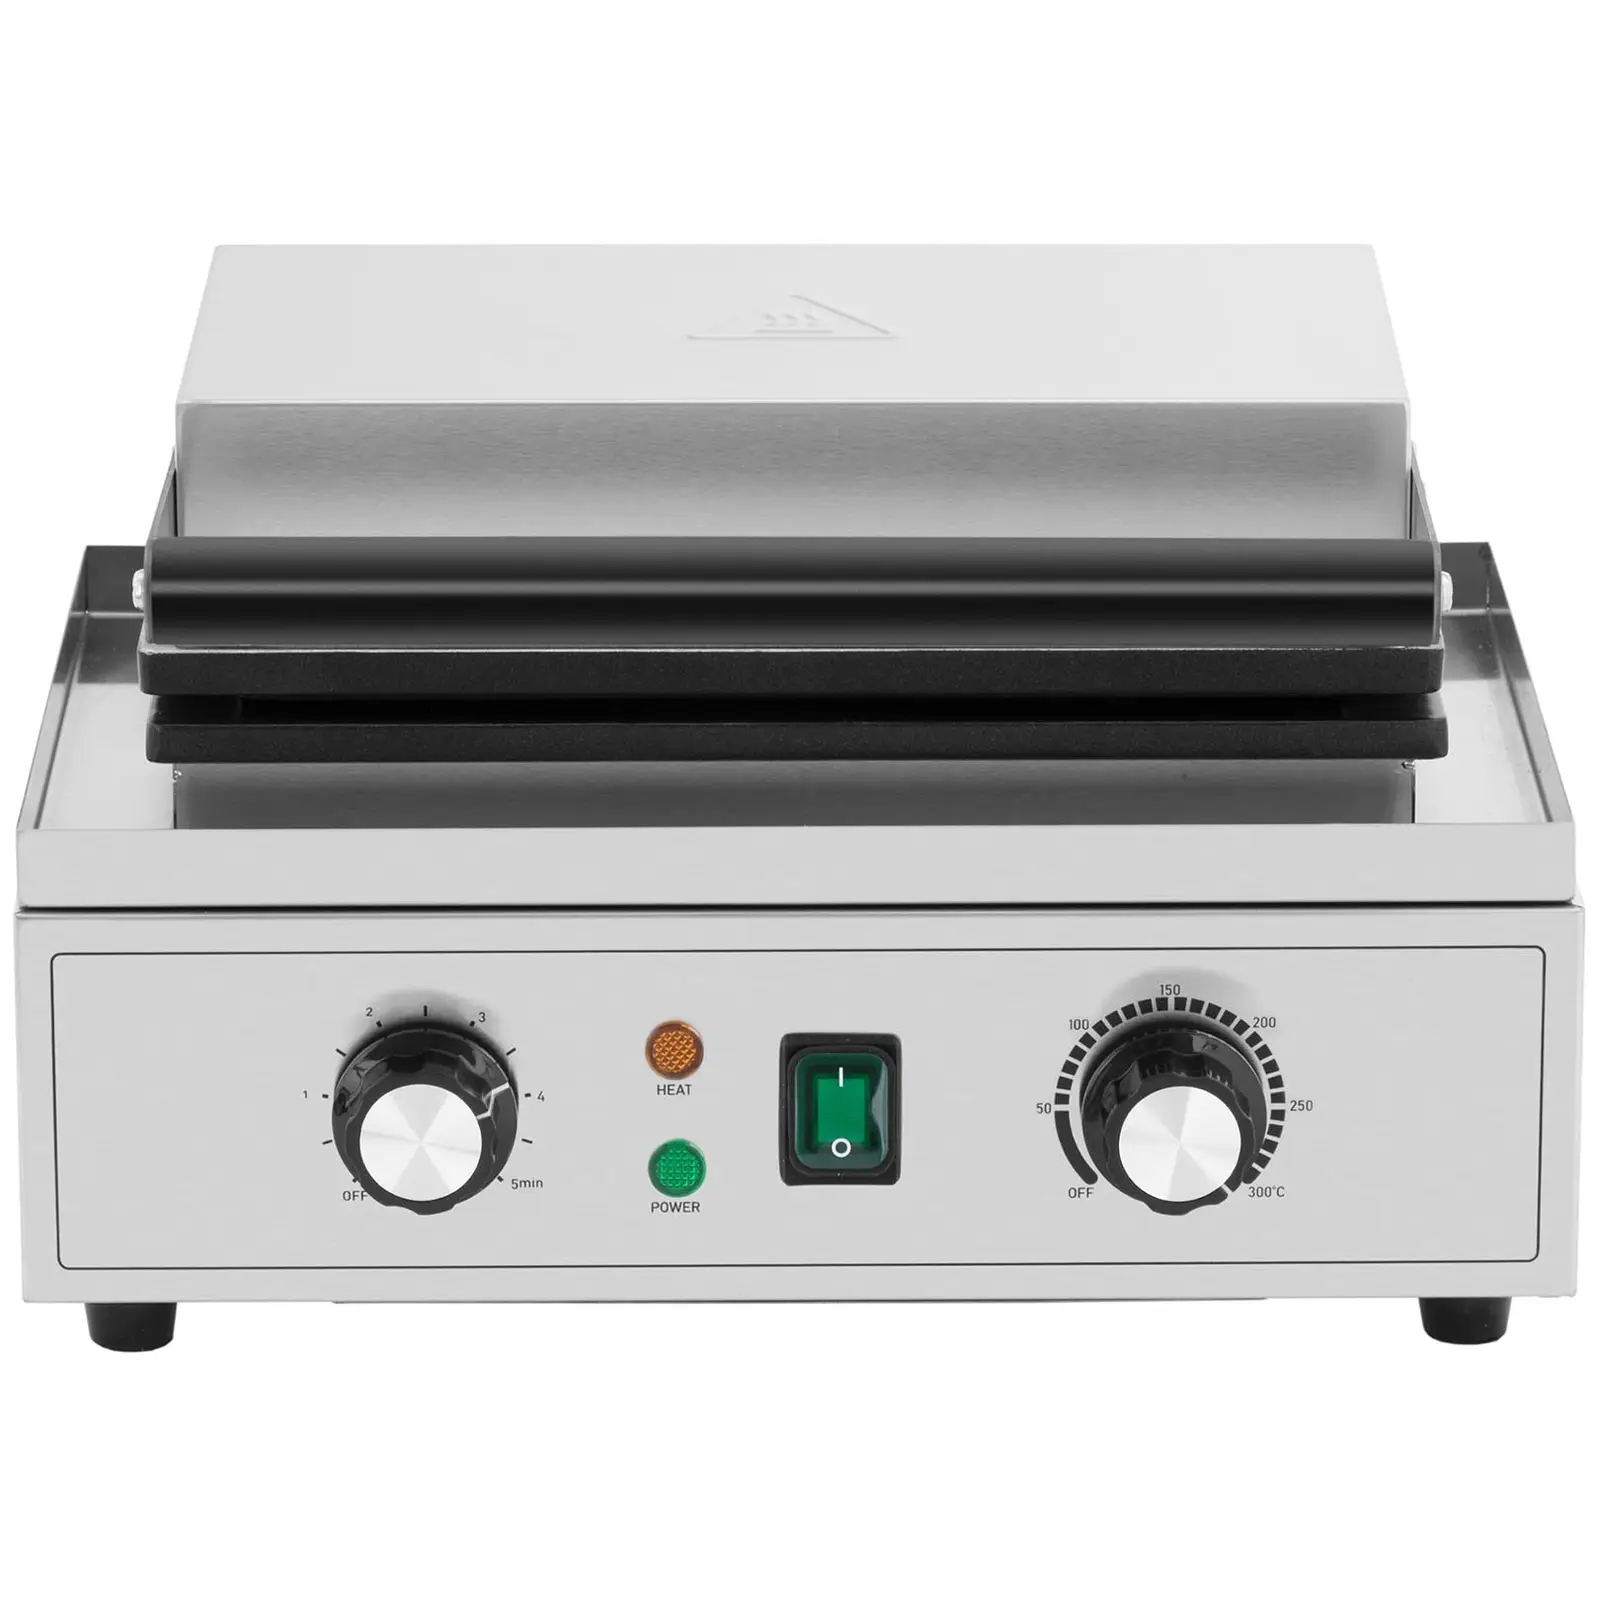 Gofrownica - 3 gofry belgijskie - 1500 W - 50 - 300°C - 0 - 5 timer - Royal Catering